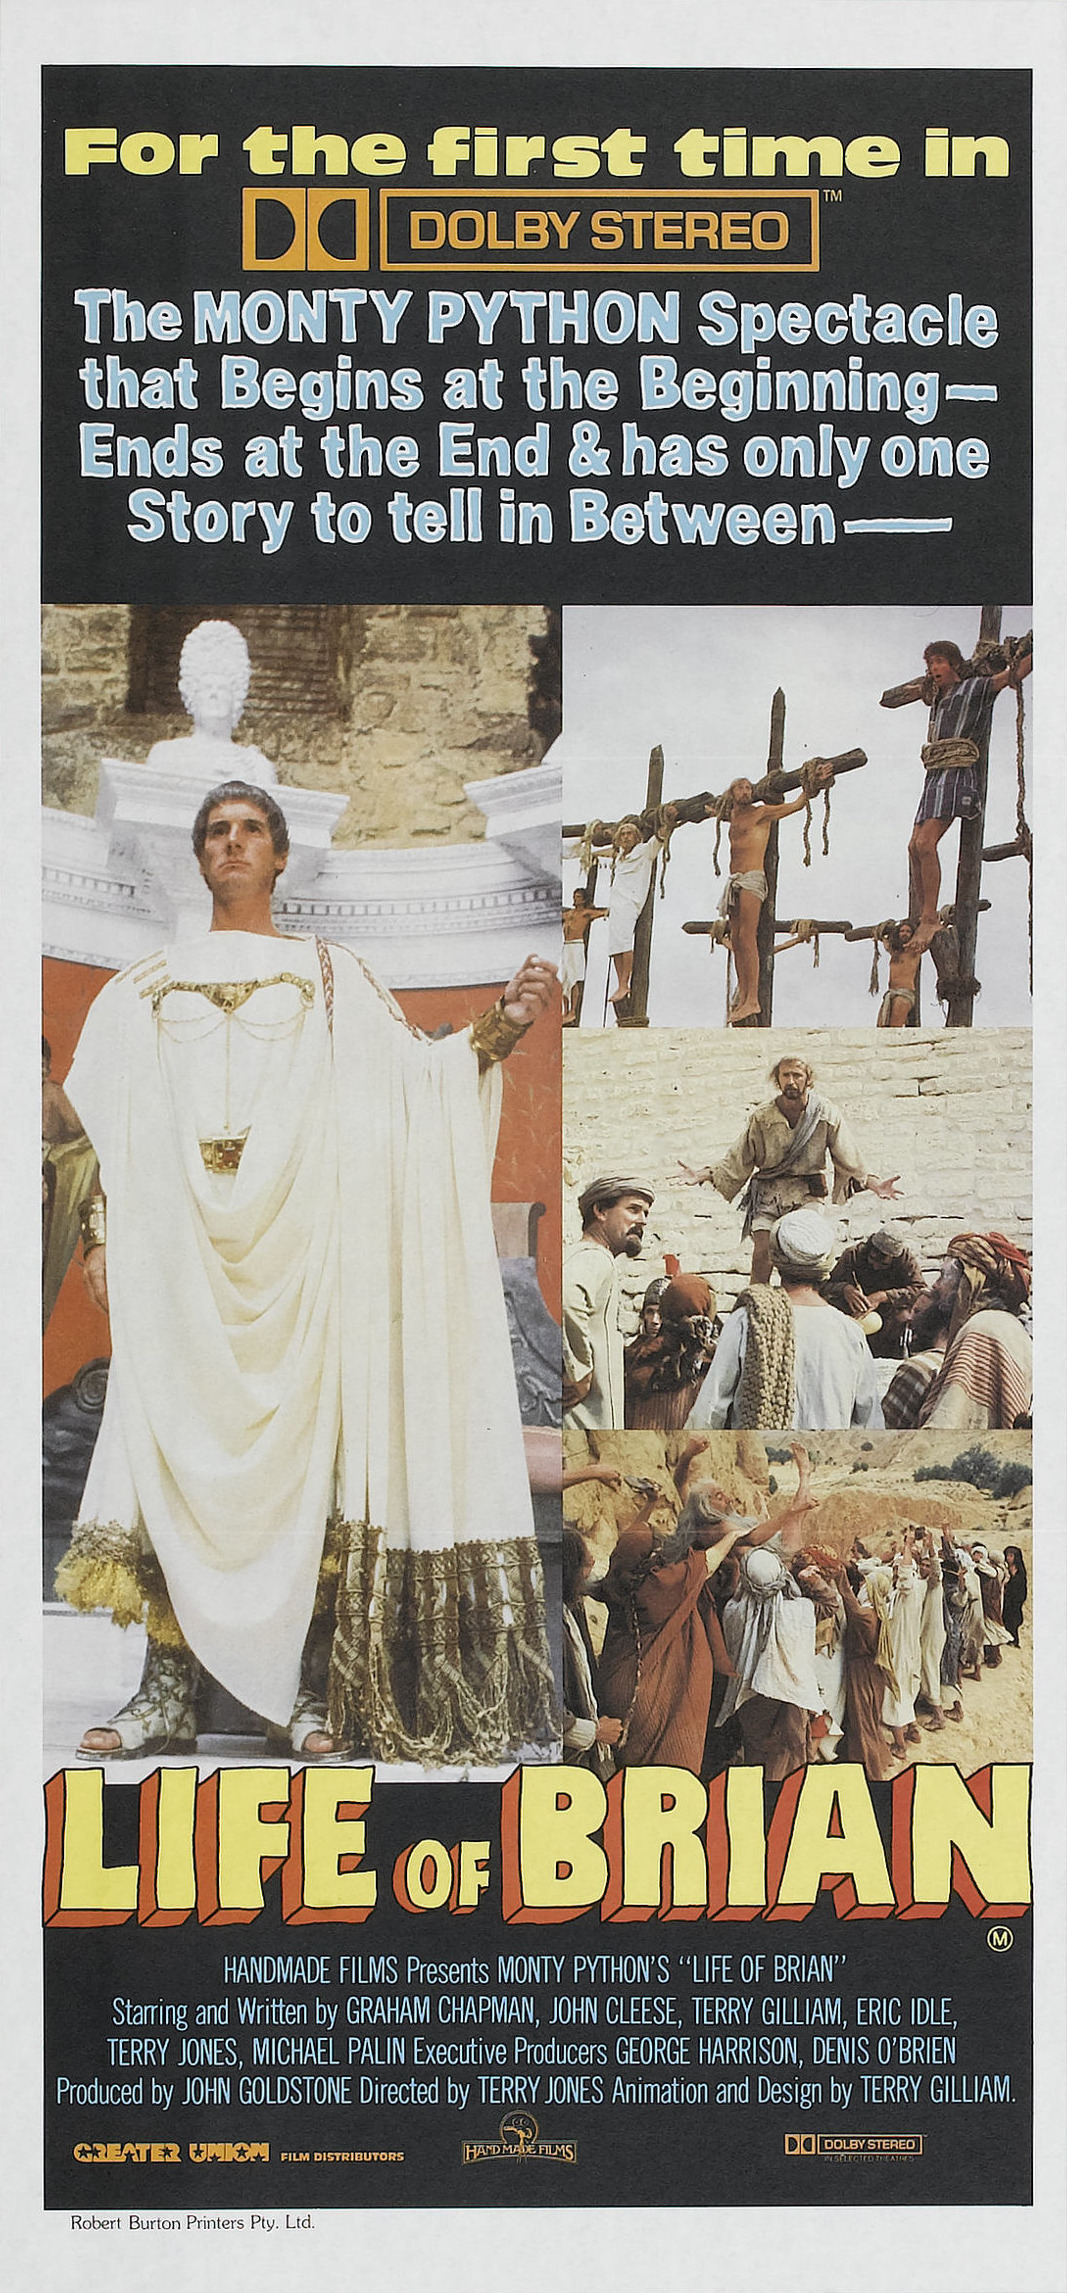 Mega Sized Movie Poster Image for Monty Python's Life of Brian (#6 of 7)